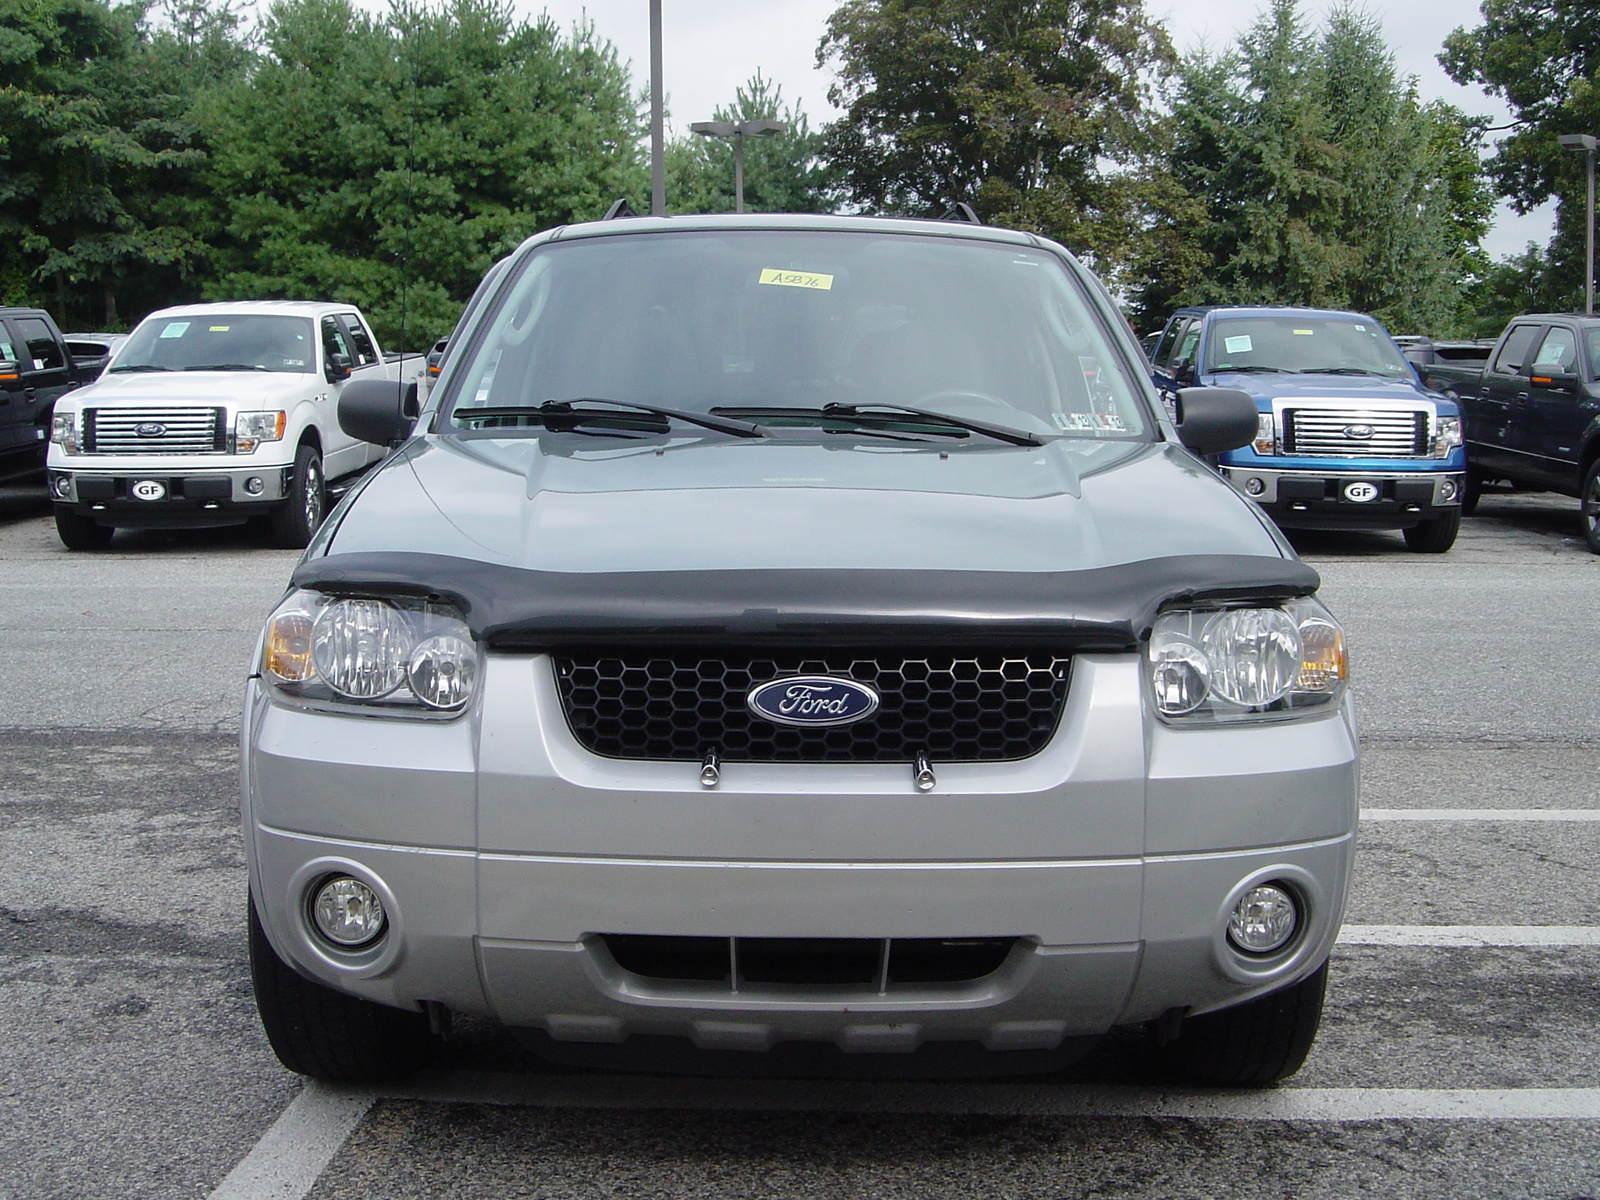 2010 Ford escape reviews yahoo #4